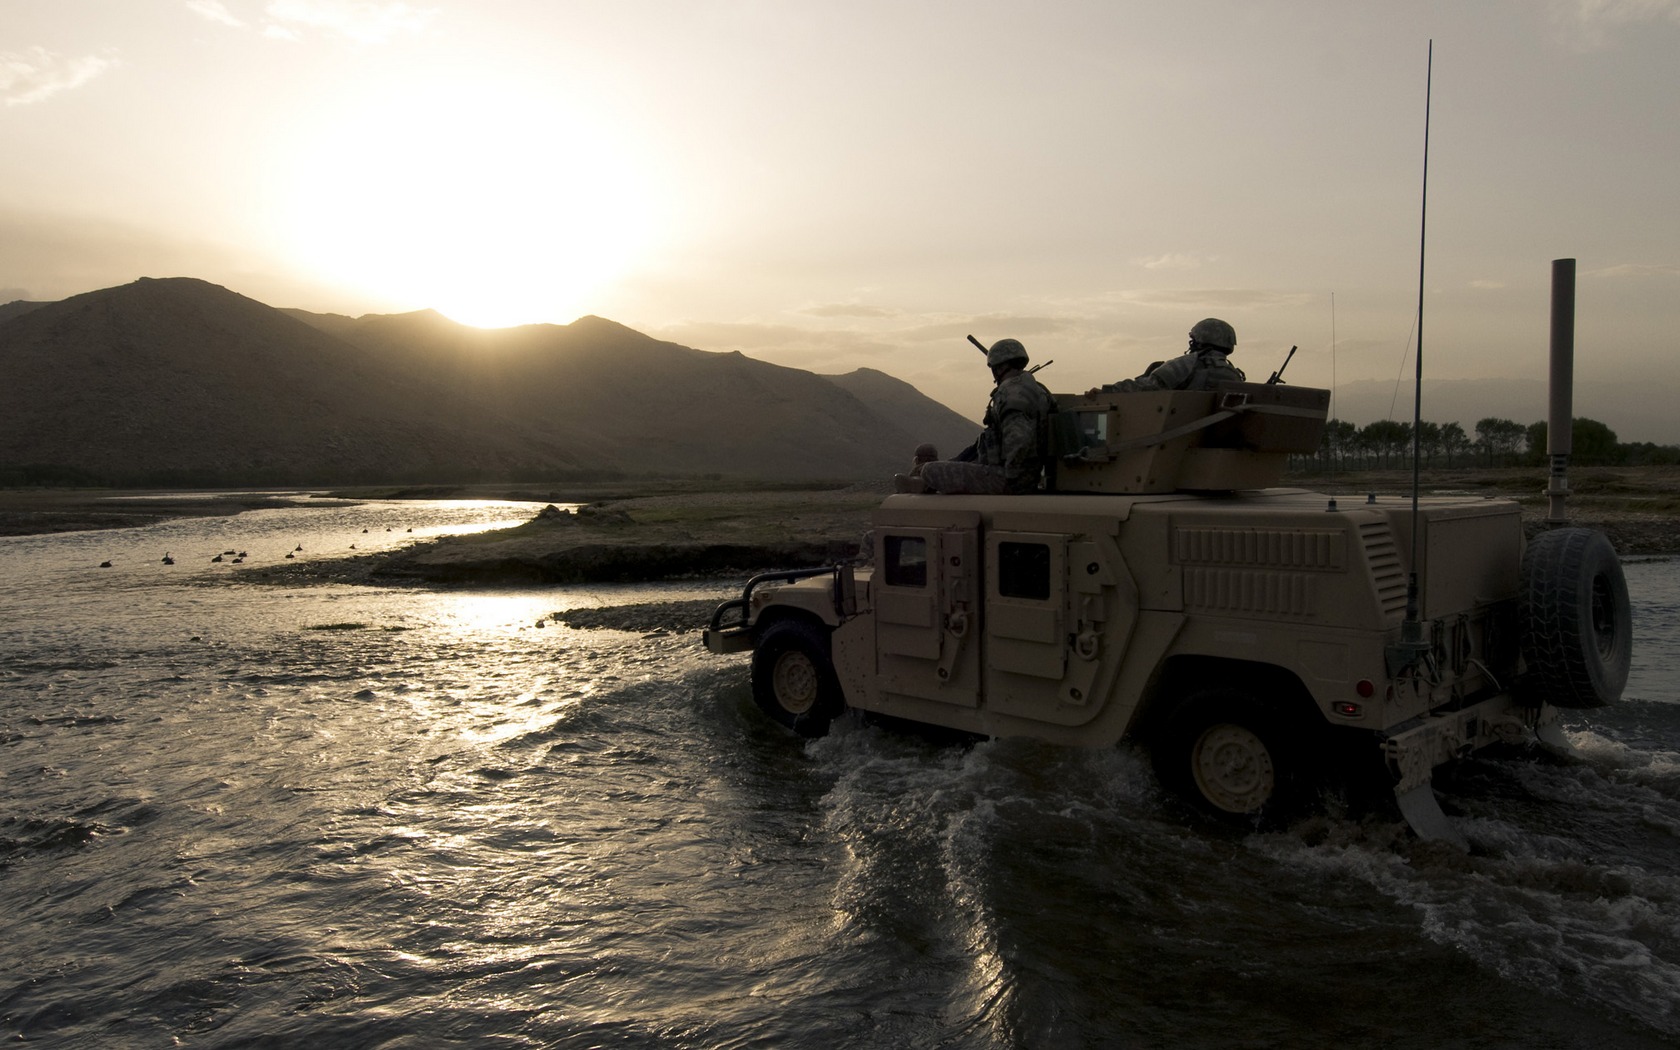 Download full size Humvee And Sunset Hummer wallpaper / 1680x1050